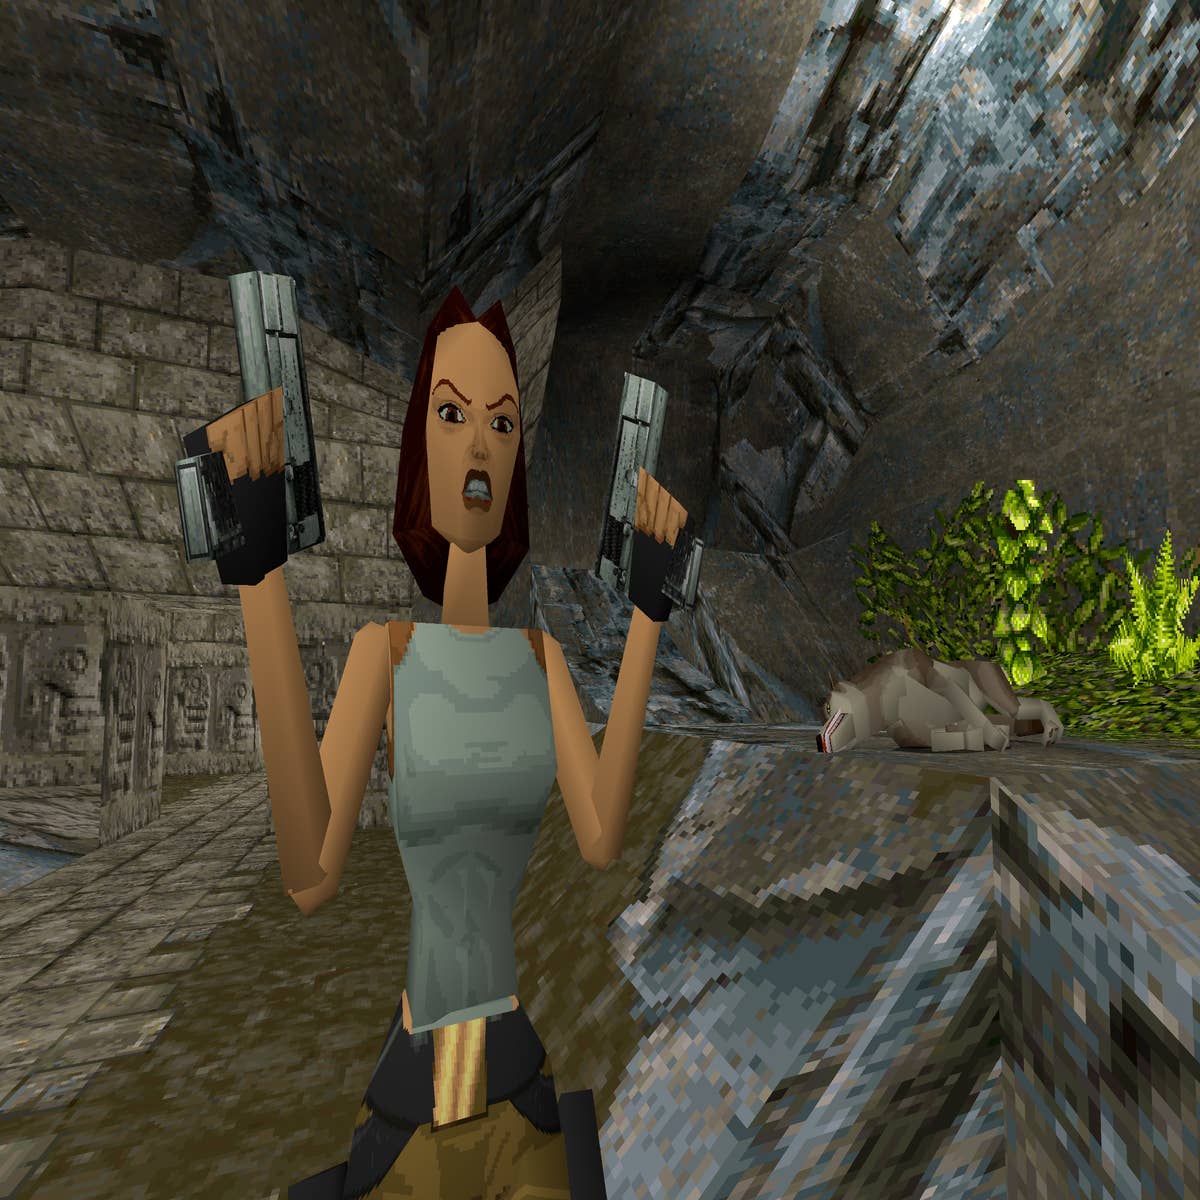 The Best Tomb Raider Game Made Lara Croft The First Lady of Gaming